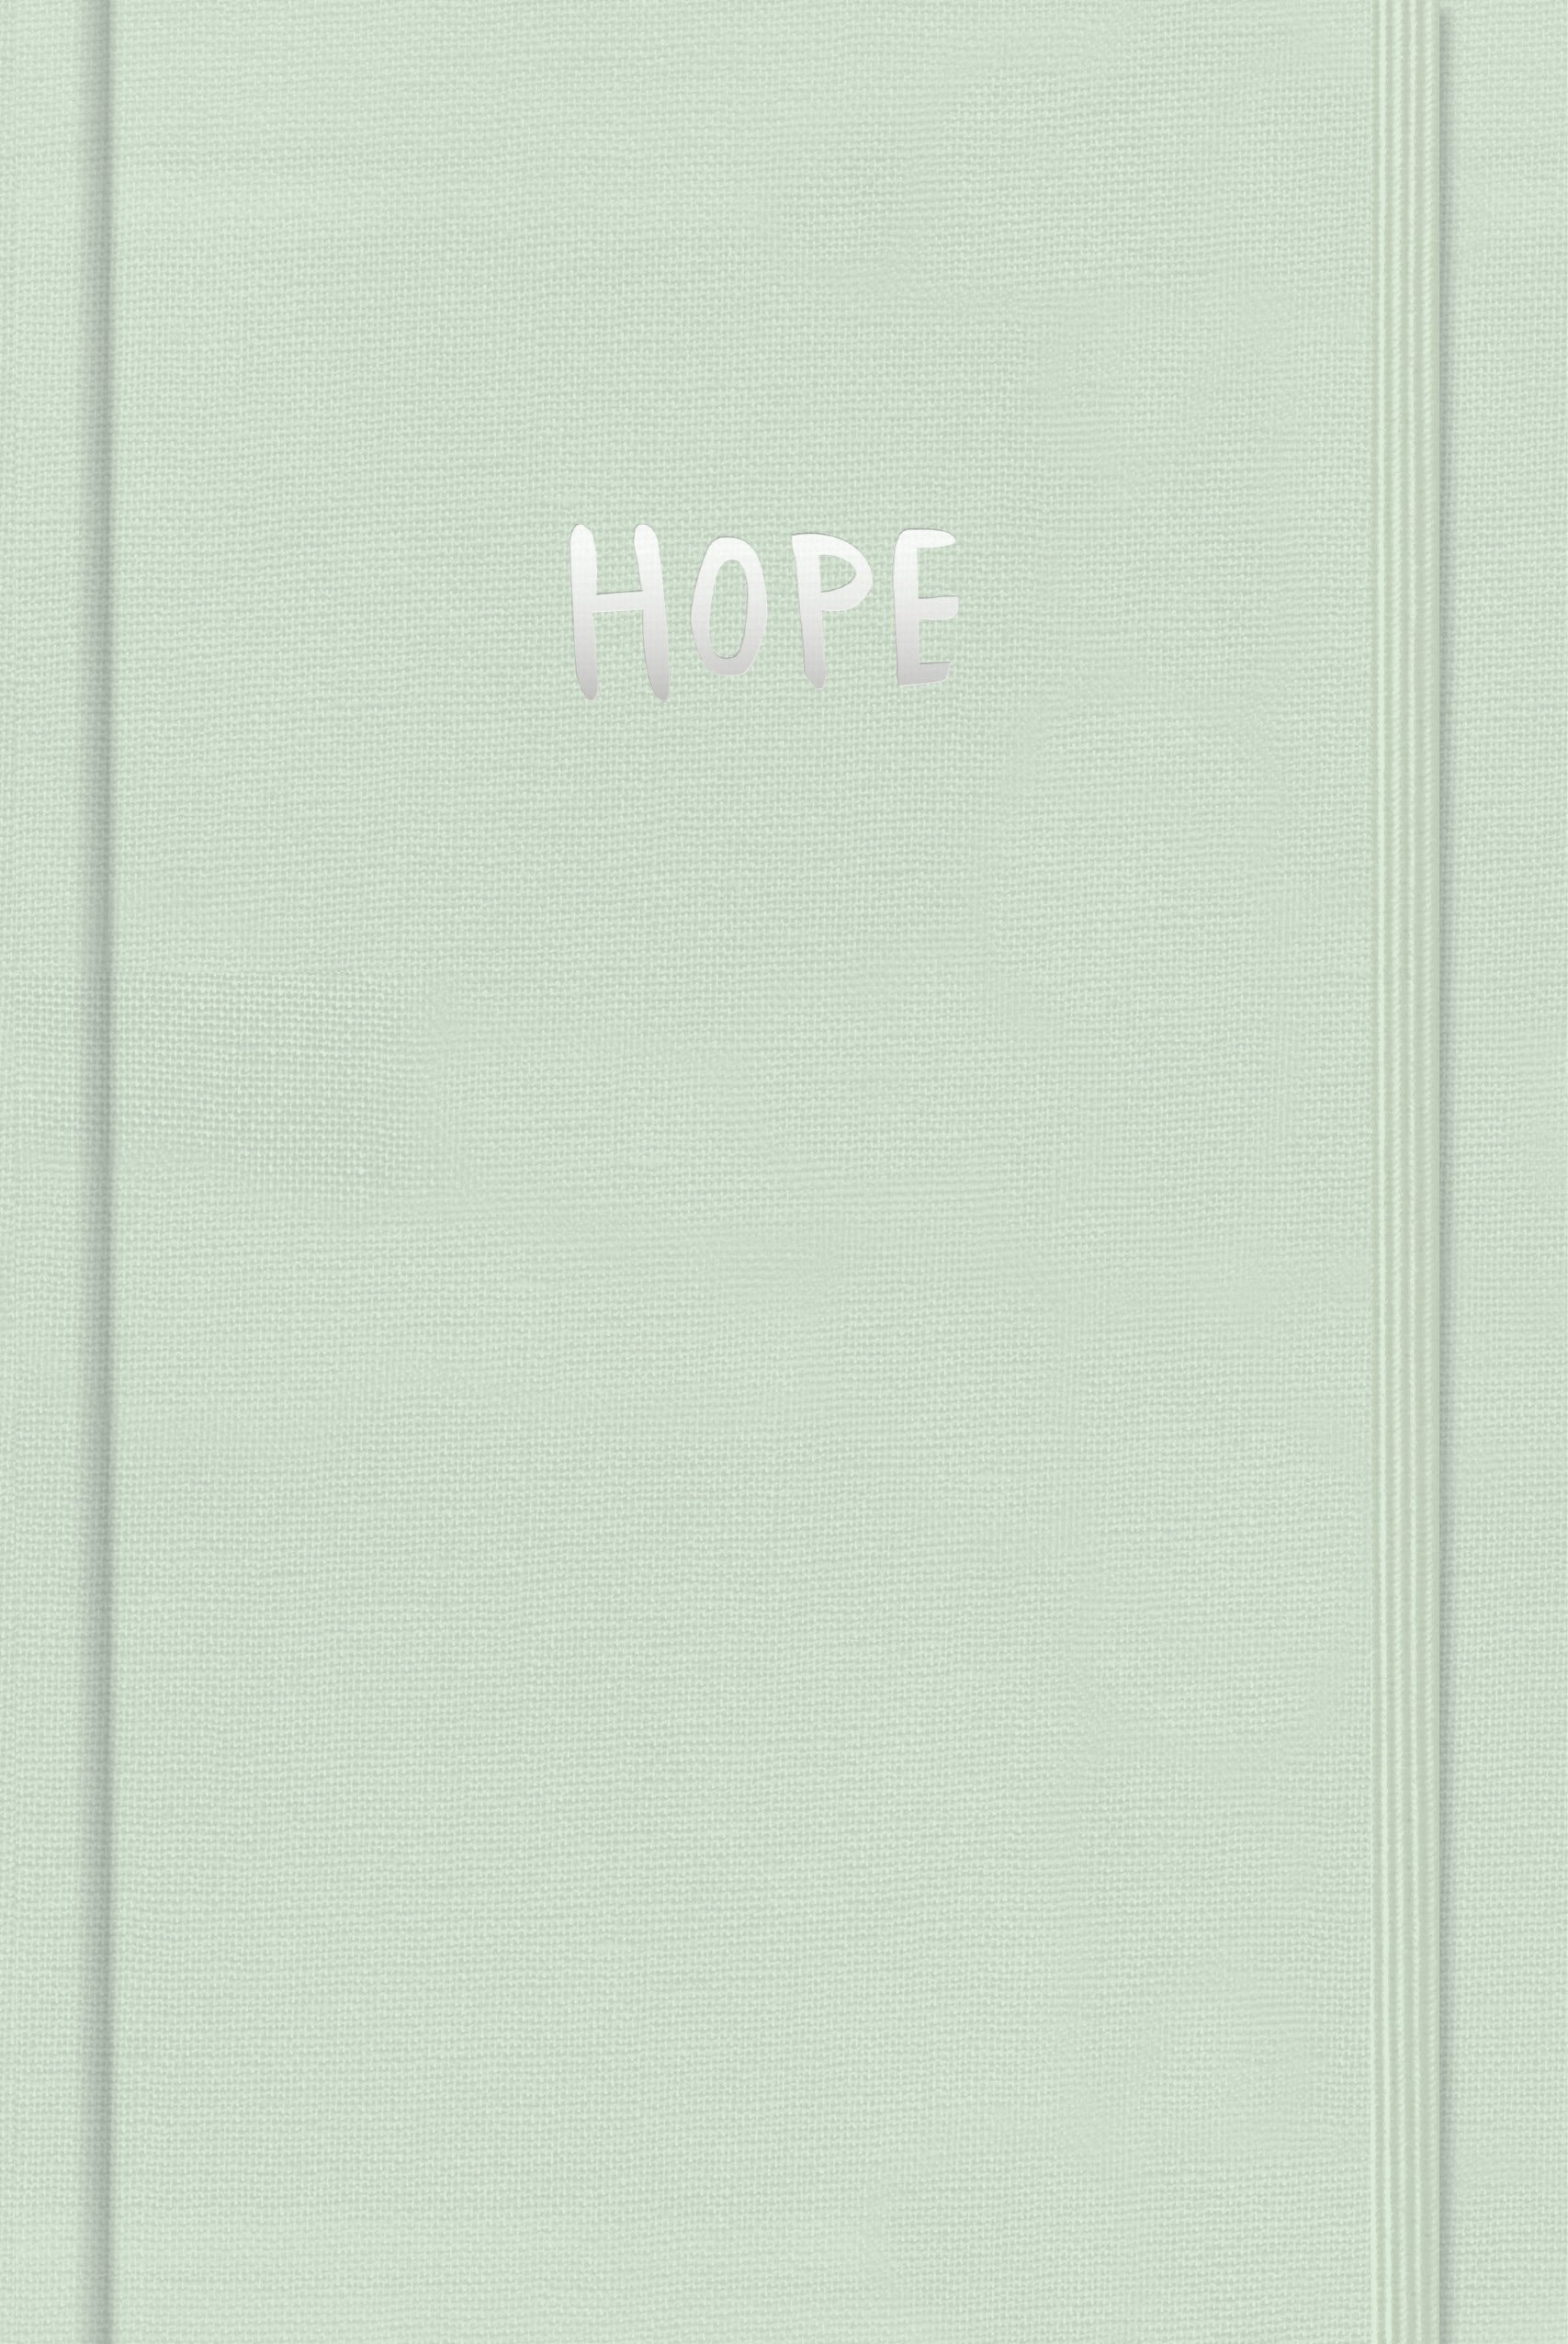 JOURNAL INTIME HOPE